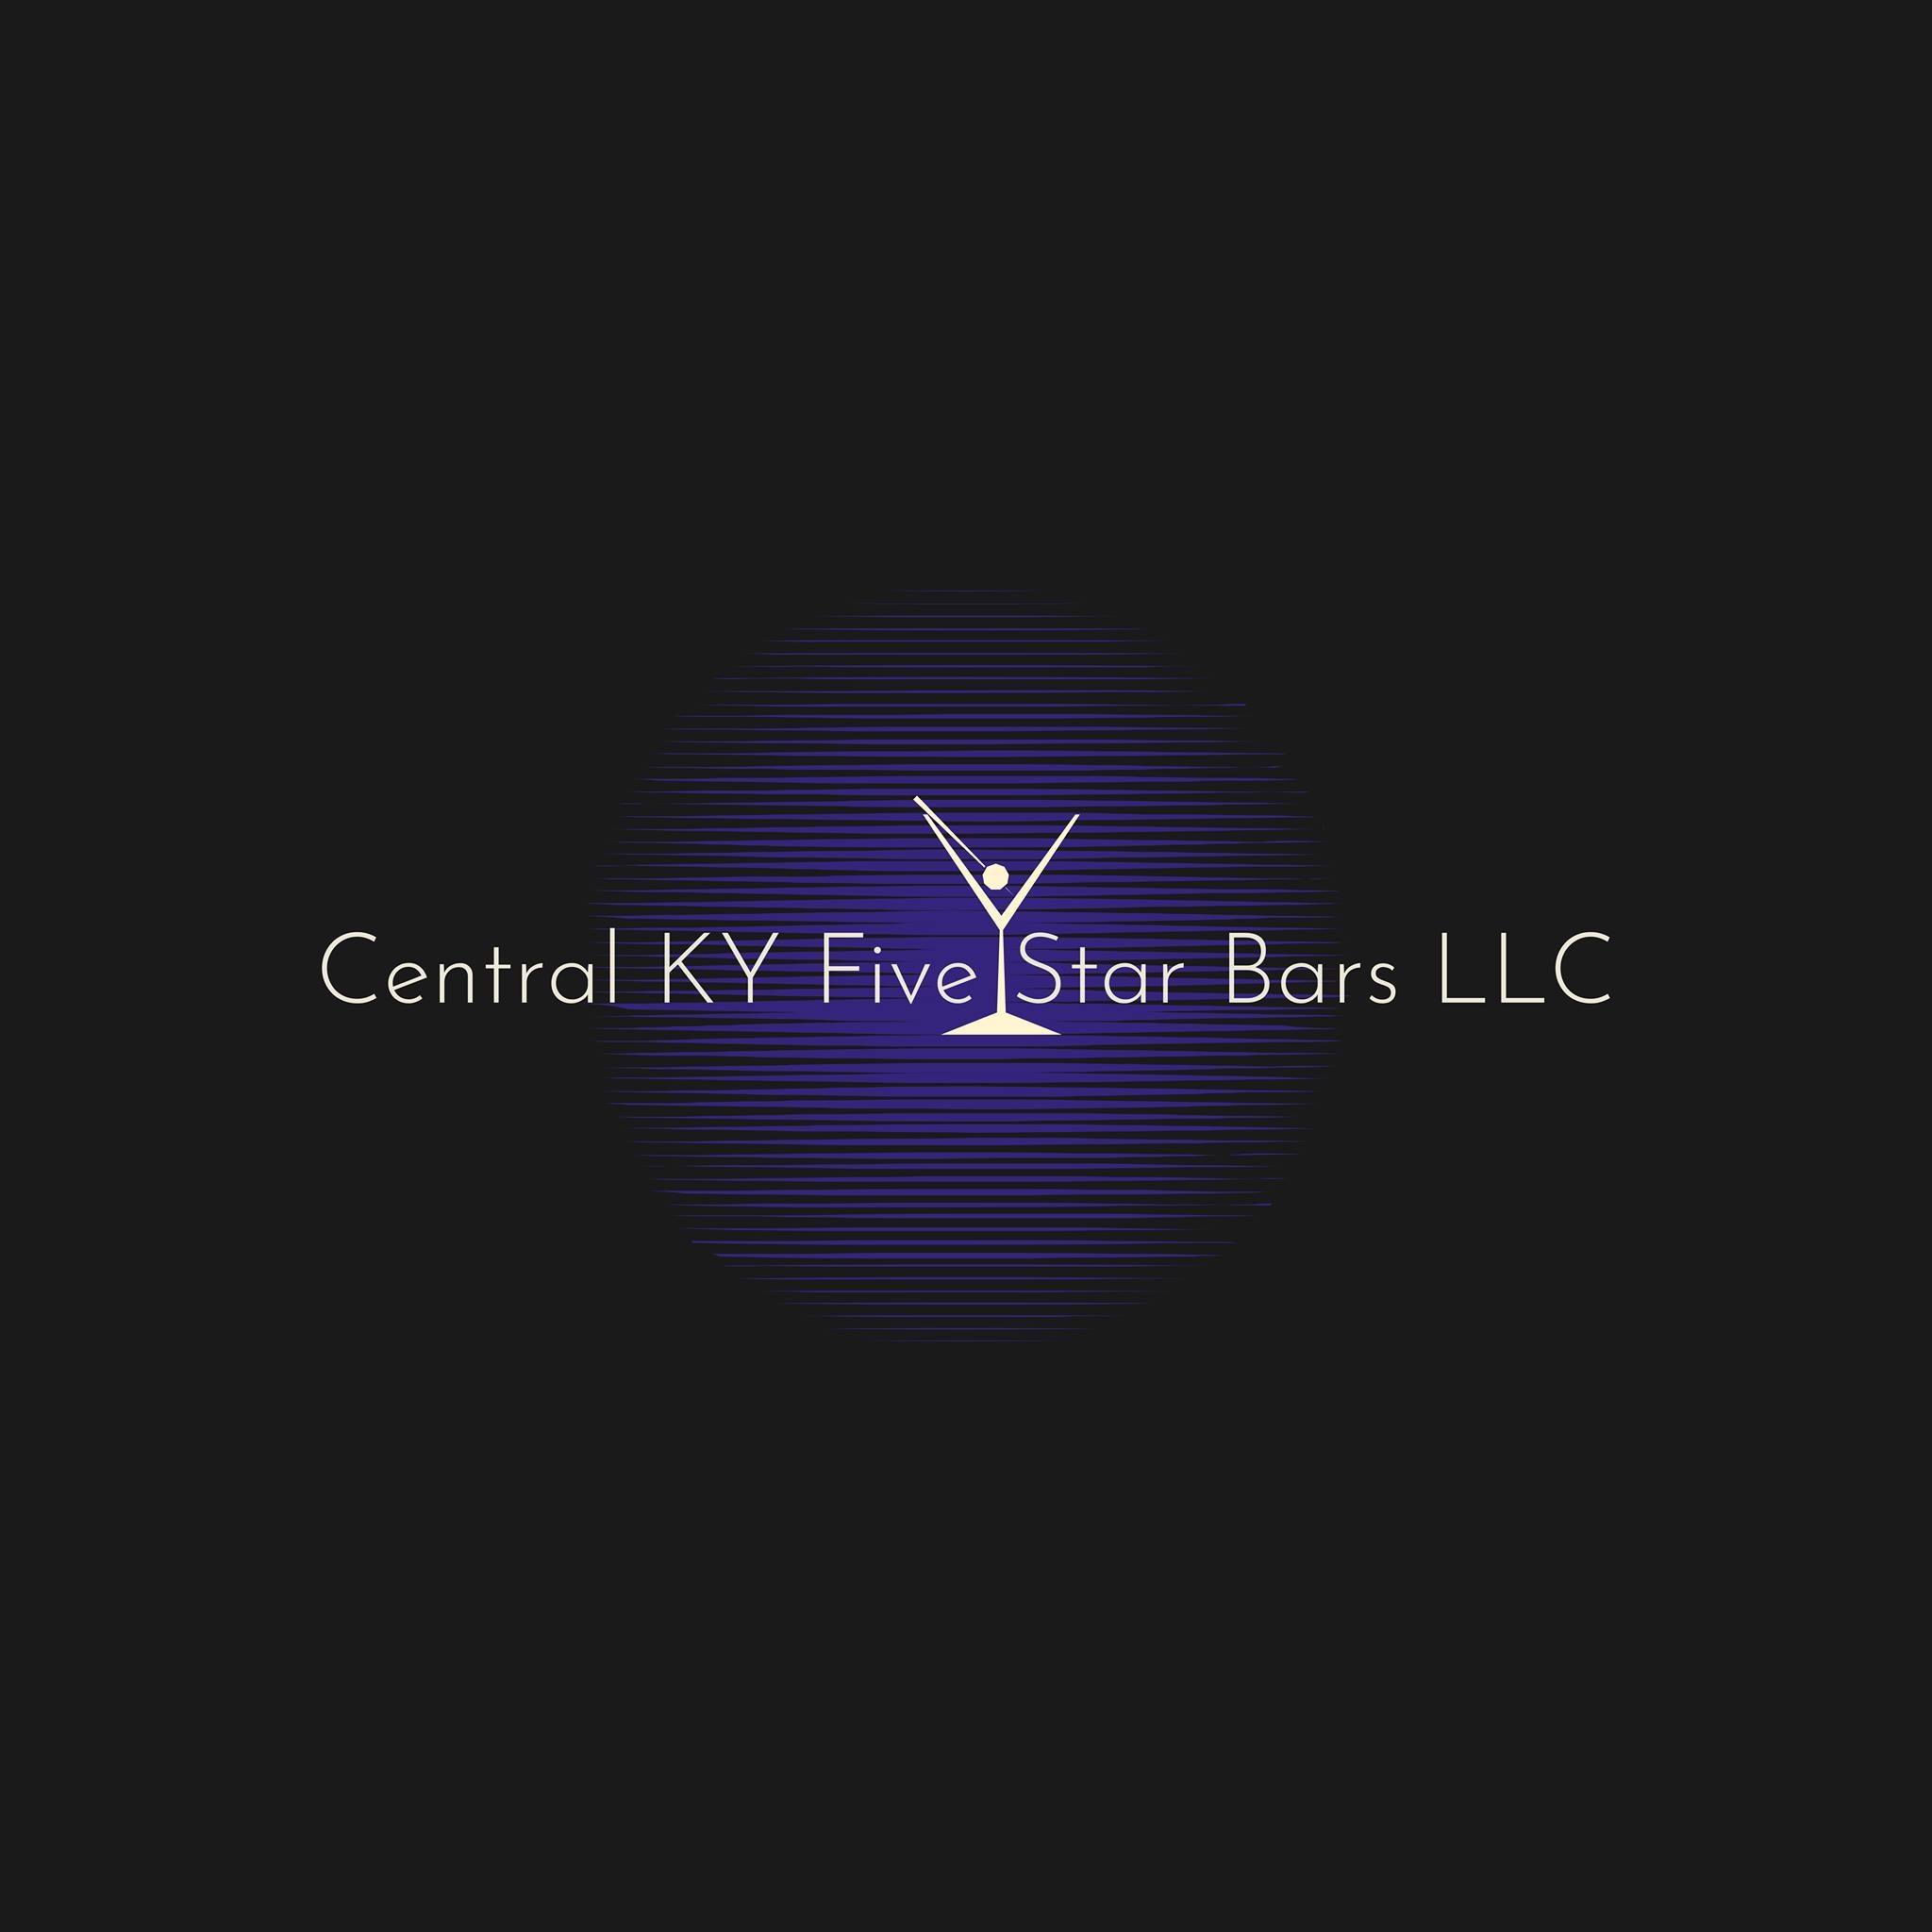 Central KY Five Star Bars